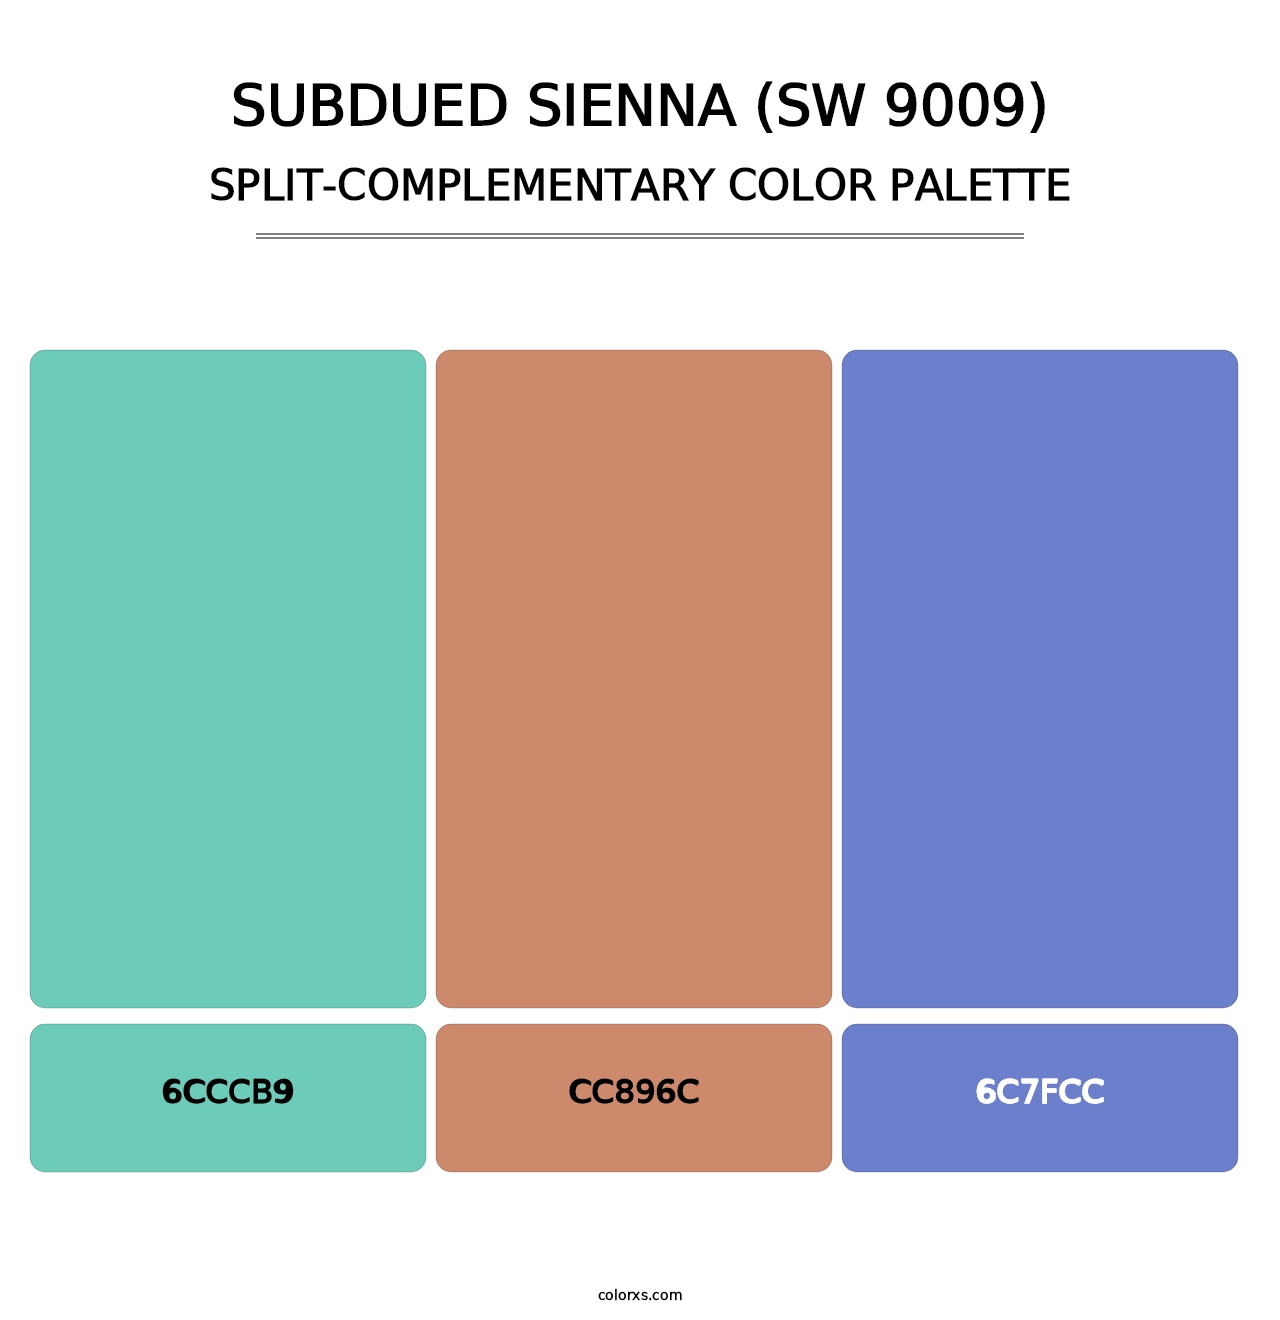 Subdued Sienna (SW 9009) - Split-Complementary Color Palette